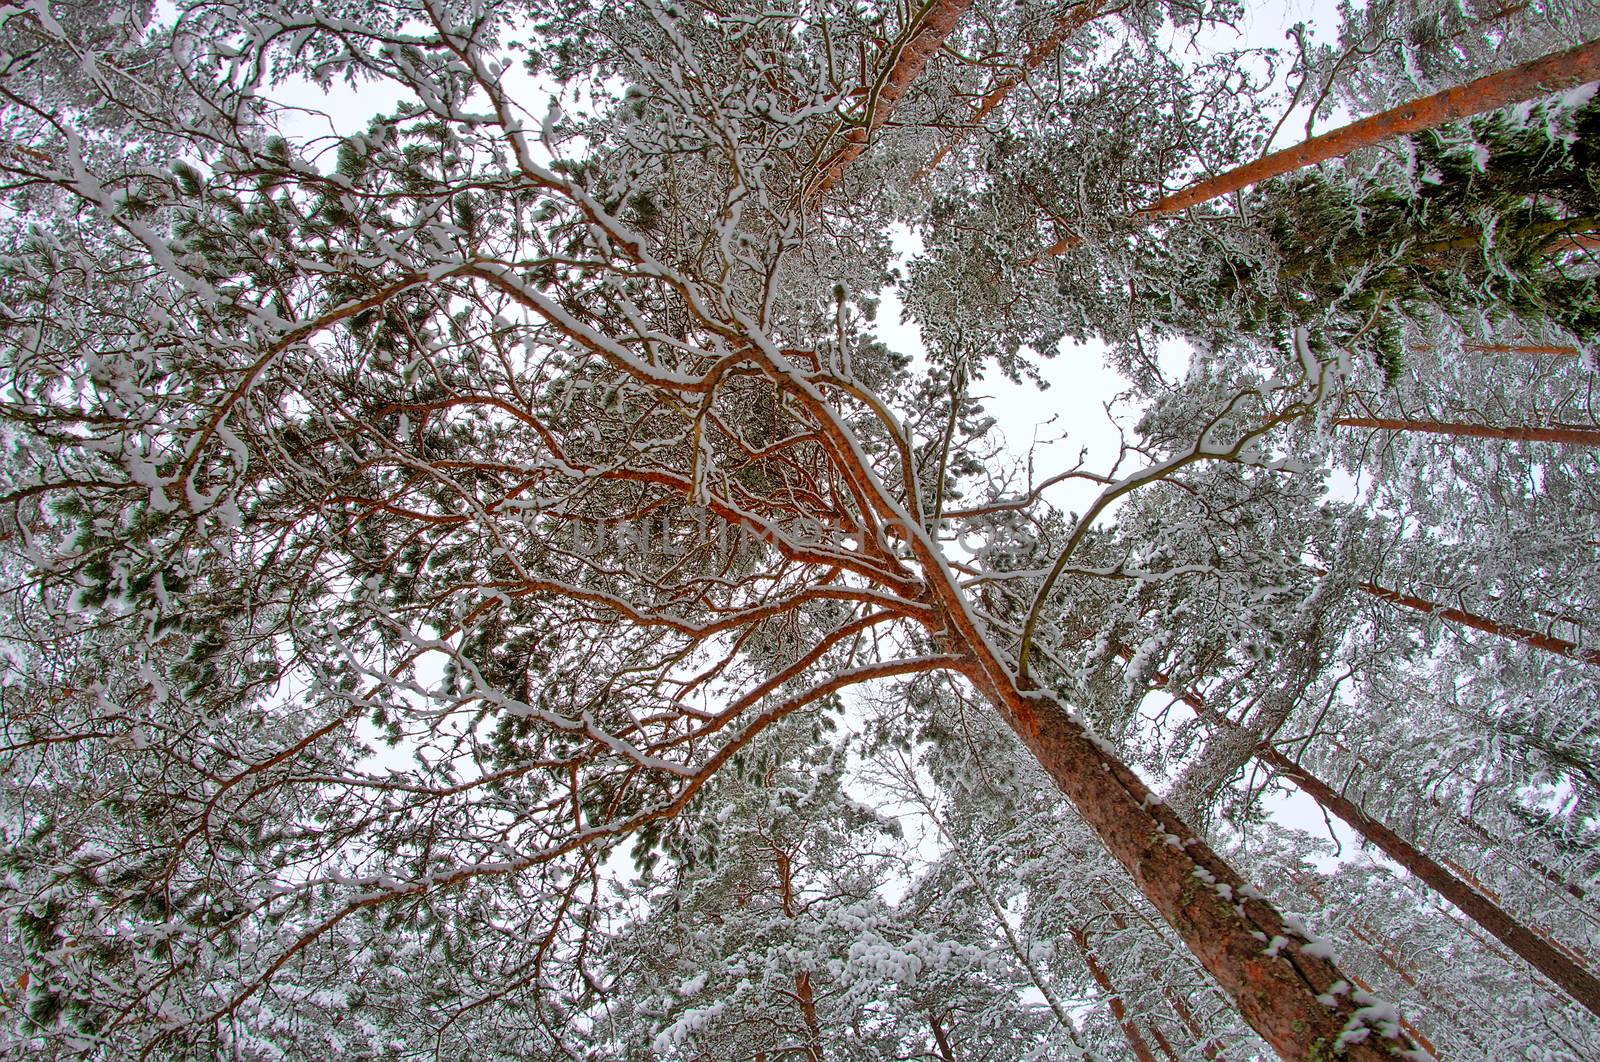 Colorful pine trees covered in snow at wintertime. Fisheye photo taken upwards from the ground.